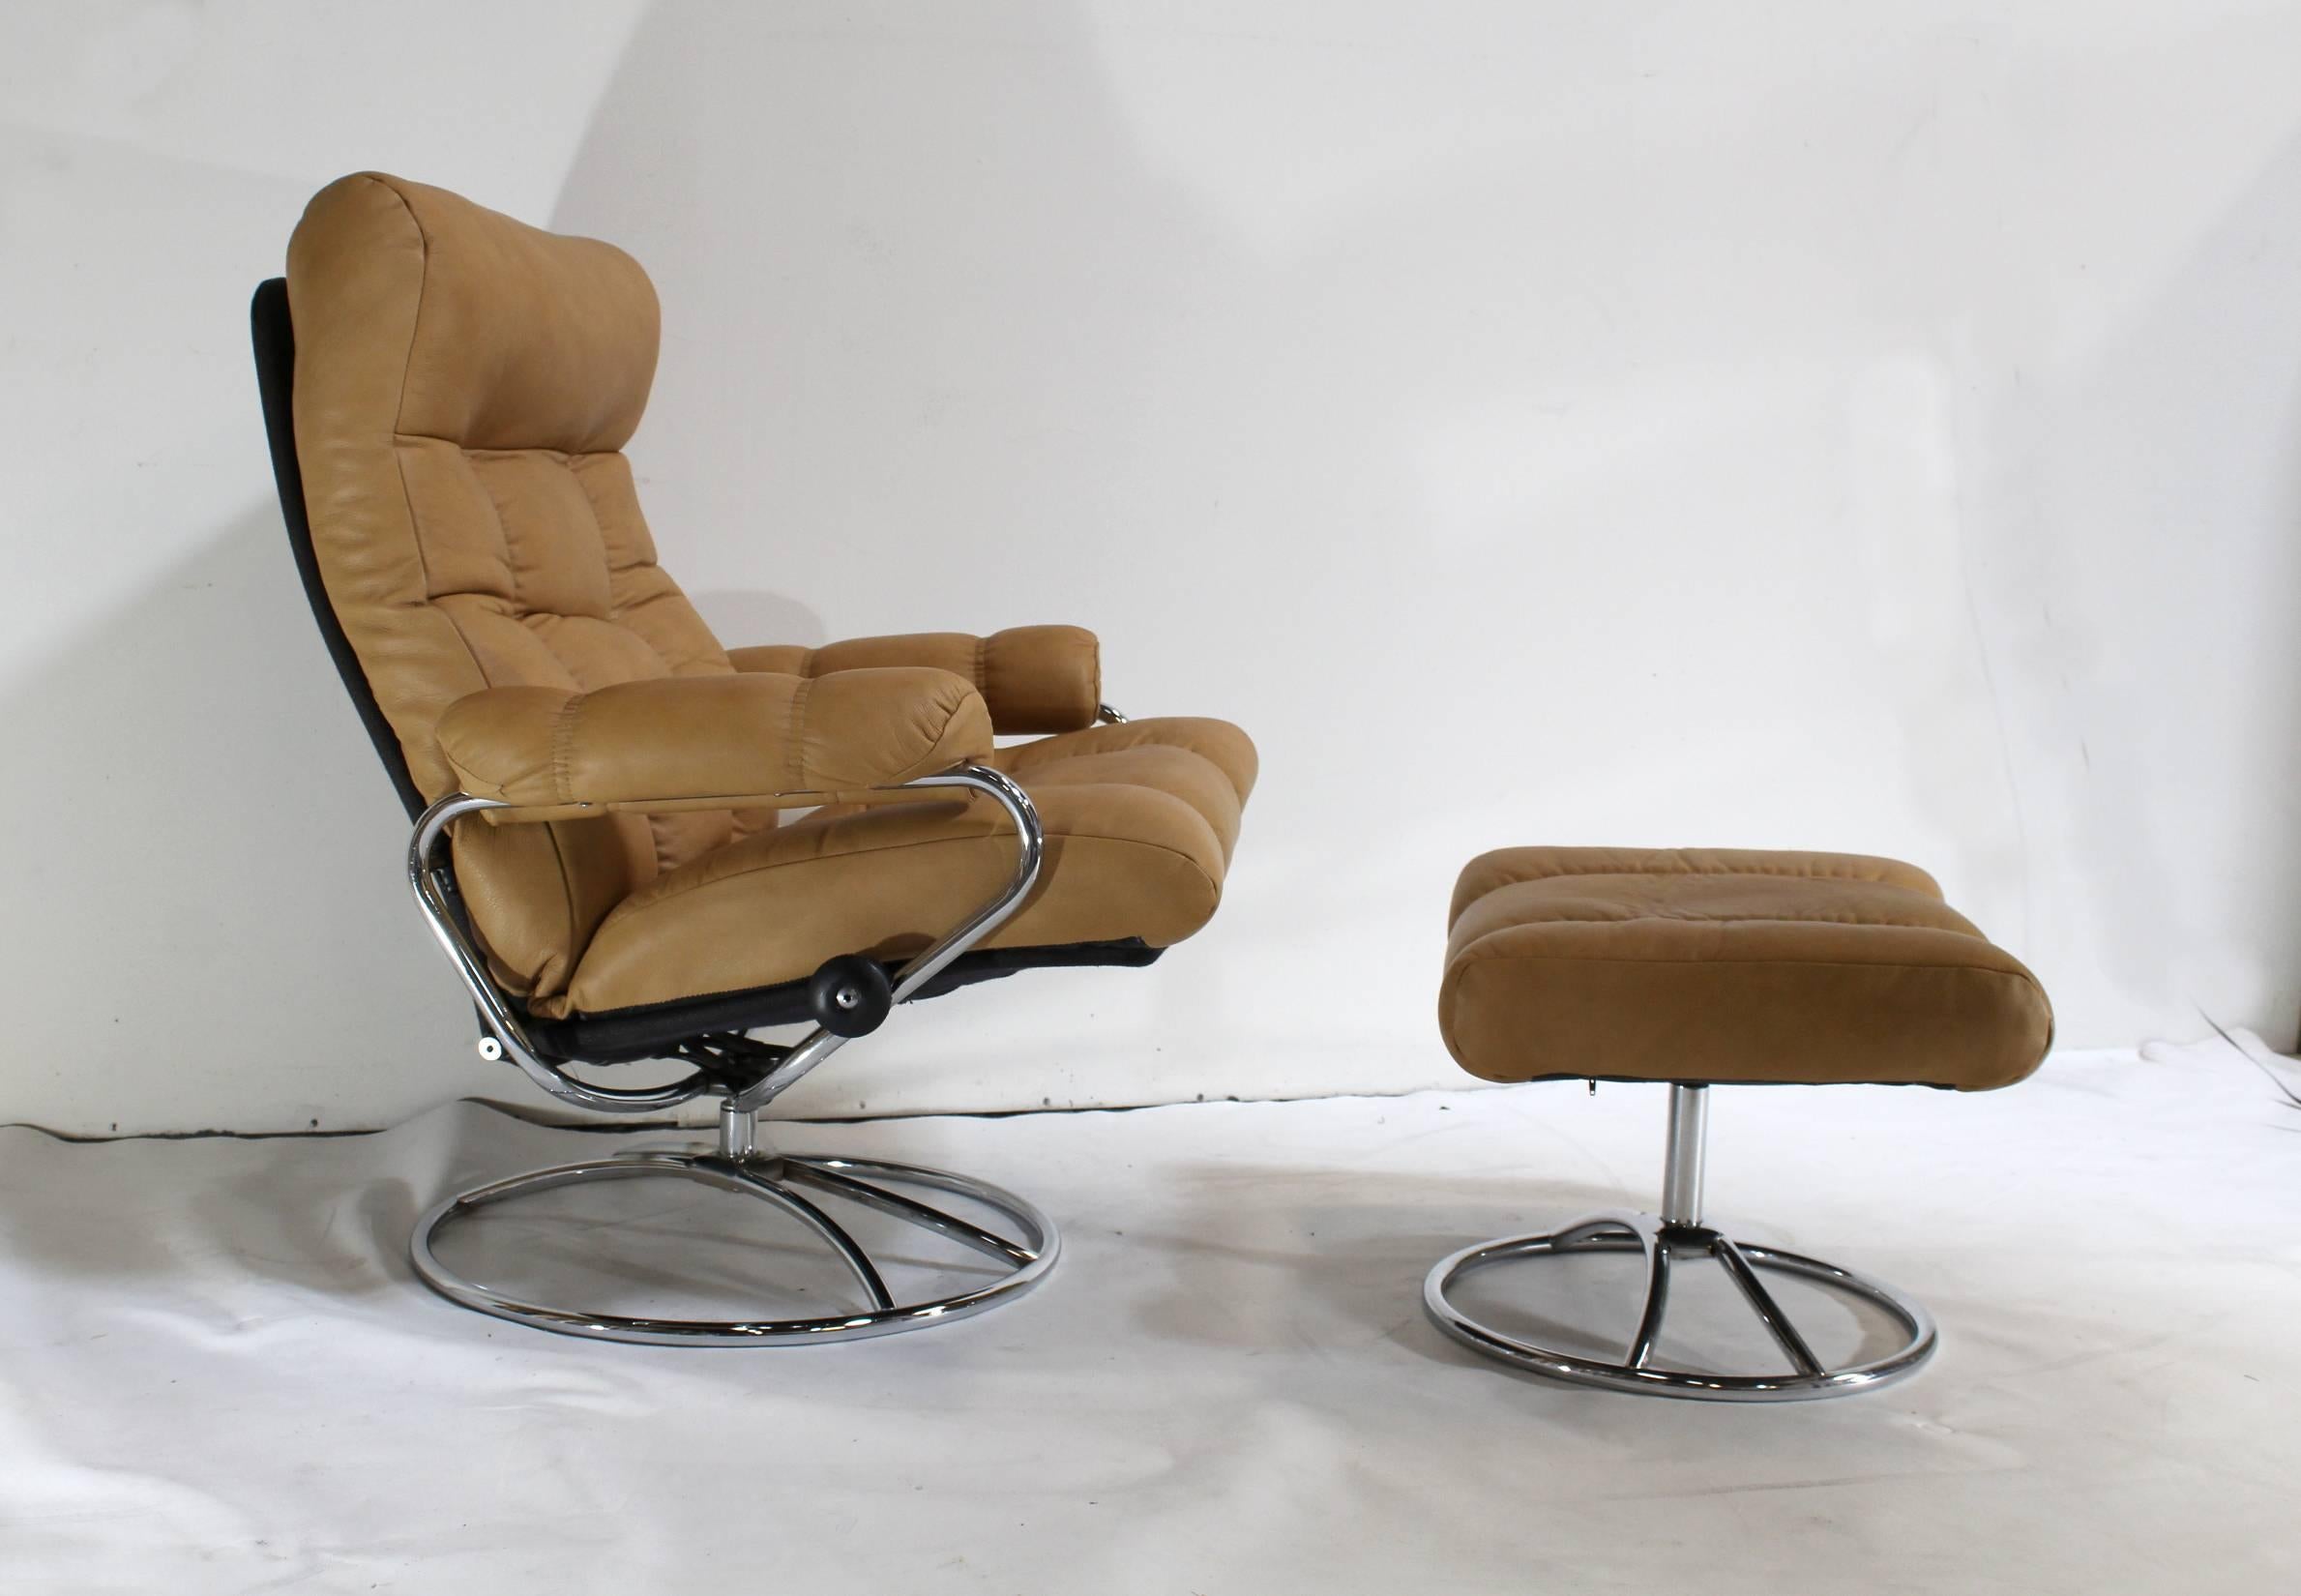 Very comfortable pair of Ekornes recliners from the 1970s, Designed and manufactured by Ekornes Stressless in Norway. Newly upholstered in soft light brown tan leather. With modern, chrome swivel bases.

Ottoman measures 21 W, 18 D, 14 H.